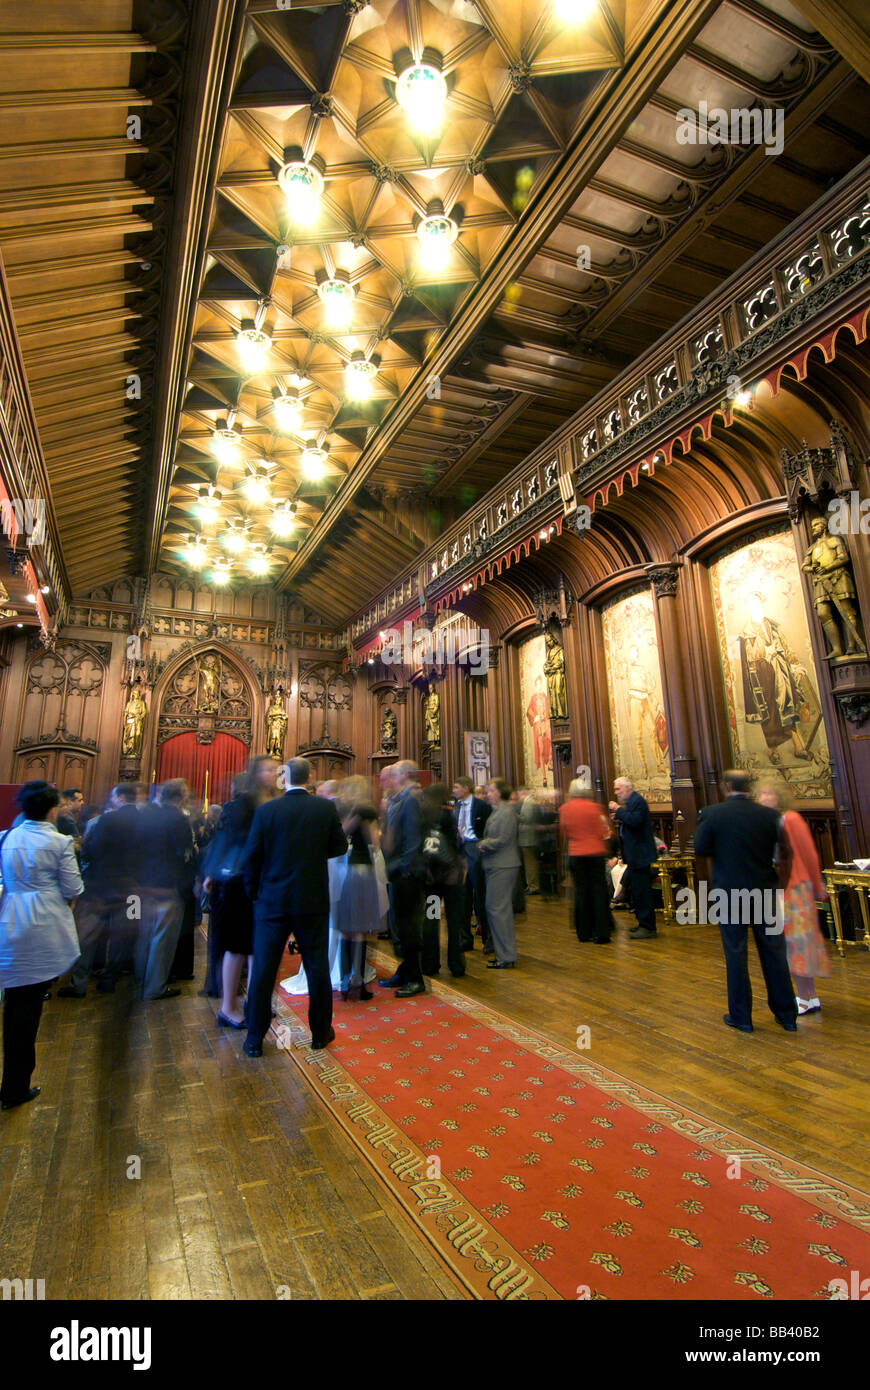 Europe, Belgium, Flanders, Brussels-Capital Region, Brussels, Brussel, Bruxelles, cocktail party at town hall in the Gothic Hall Stock Photo